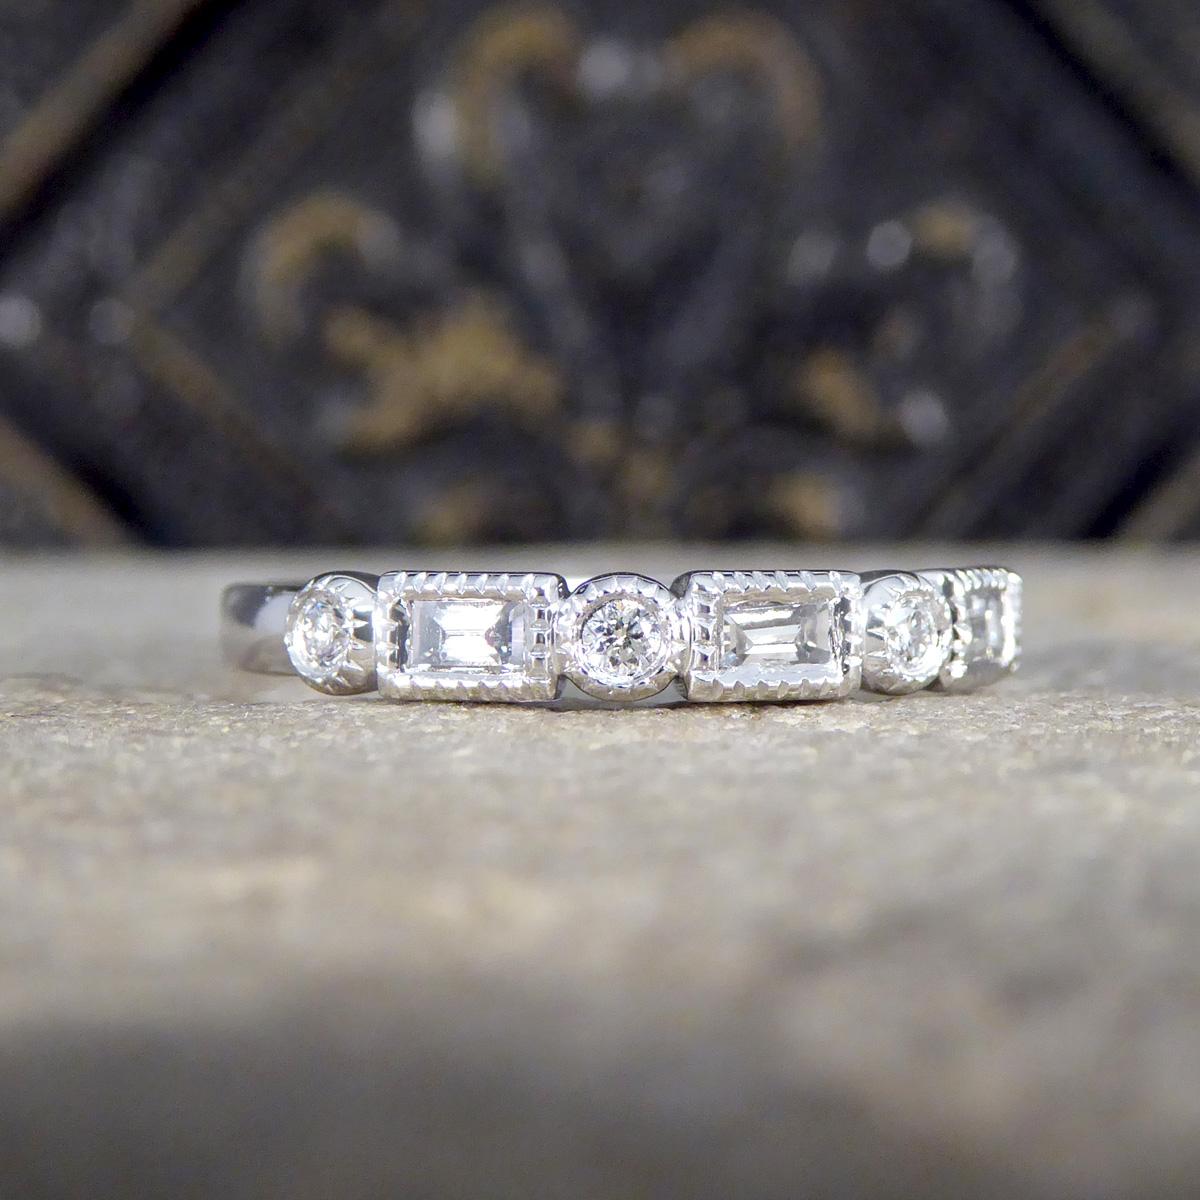 Experience timeless elegance with this Baguette and Brilliant Cut Diamond half eternity band, exquisitely crafted in sleek platinum. This band beautifully combines the sharp, clean lines of baguette-cut diamonds with the sparkling brilliance of